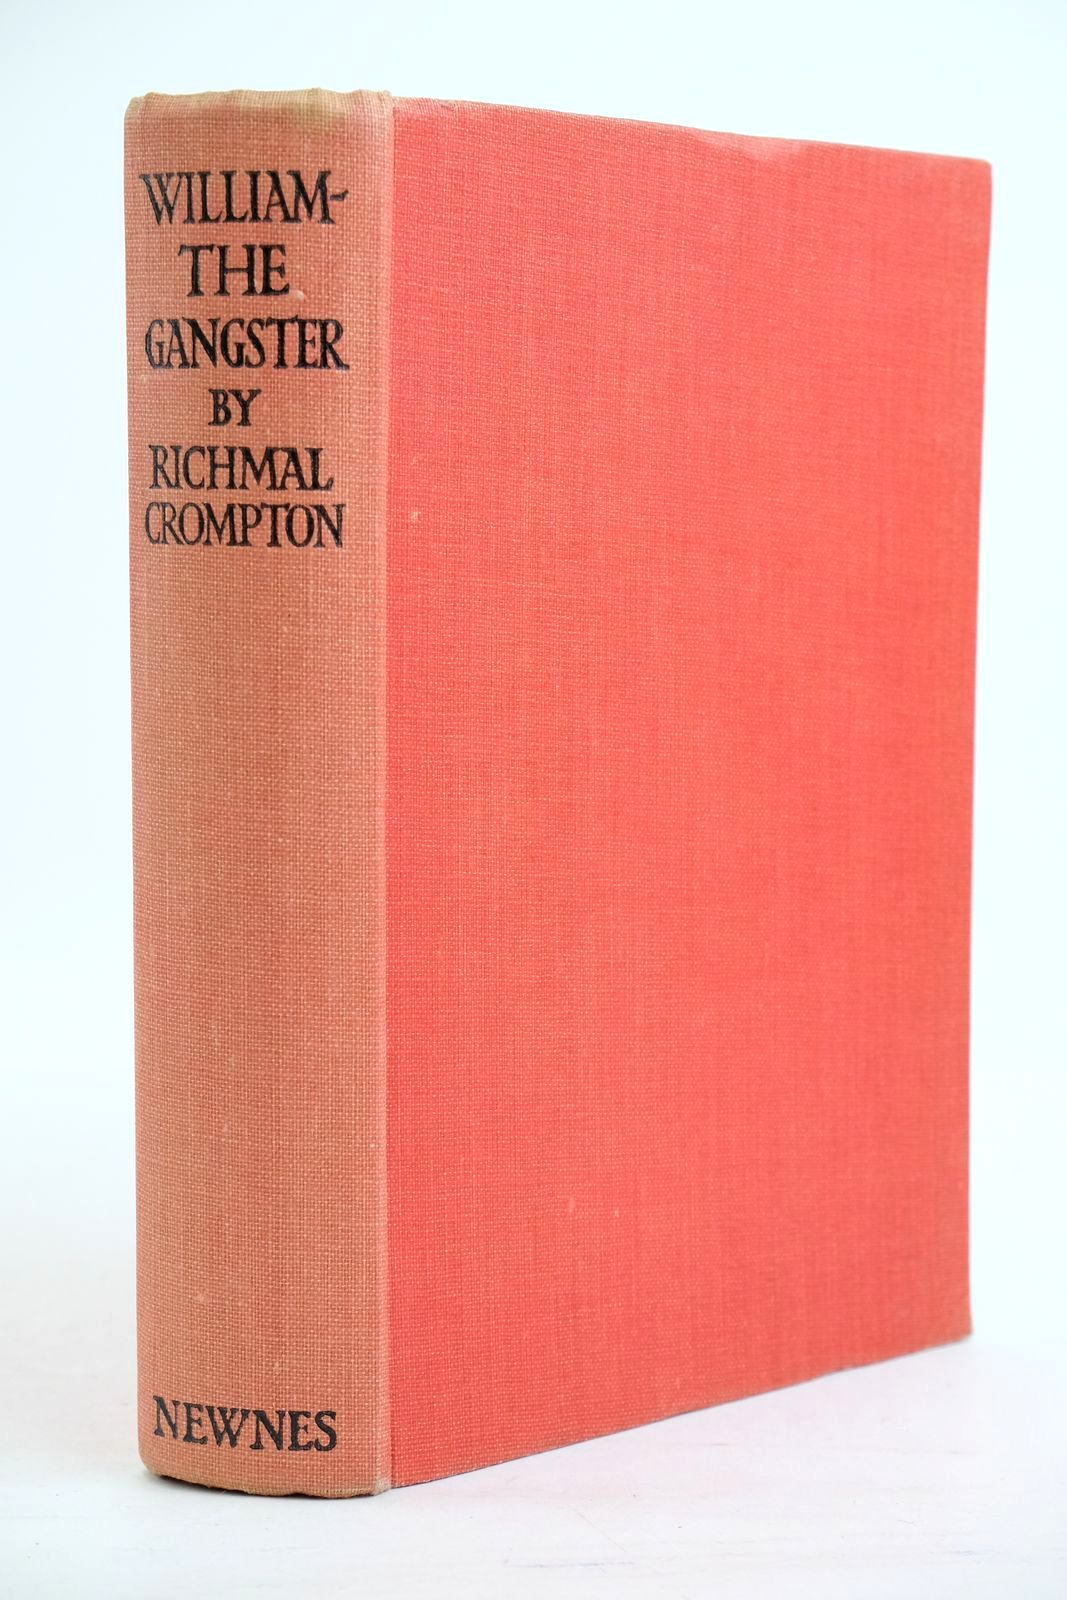 Photo of WILLIAM THE GANGSTER written by Crompton, Richmal illustrated by Henry, Thomas published by George Newnes Ltd. (STOCK CODE: 1320871)  for sale by Stella & Rose's Books